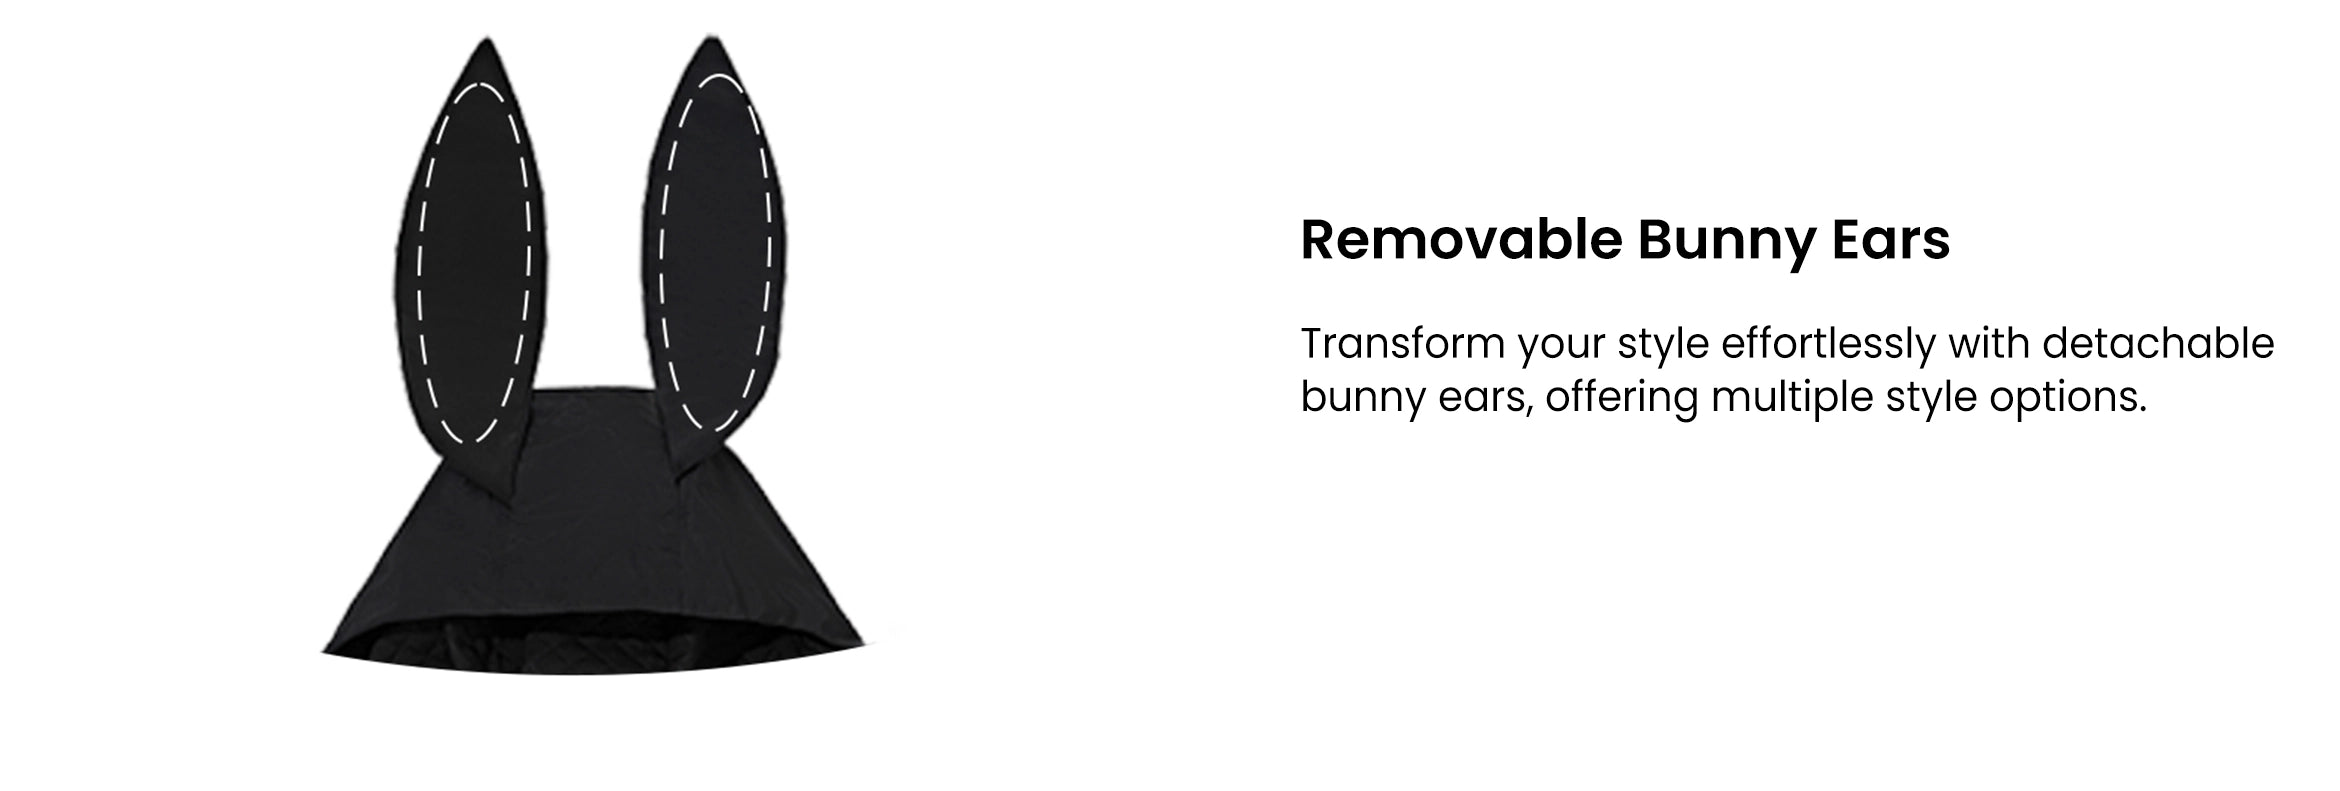 4. Removable Bunny Ears